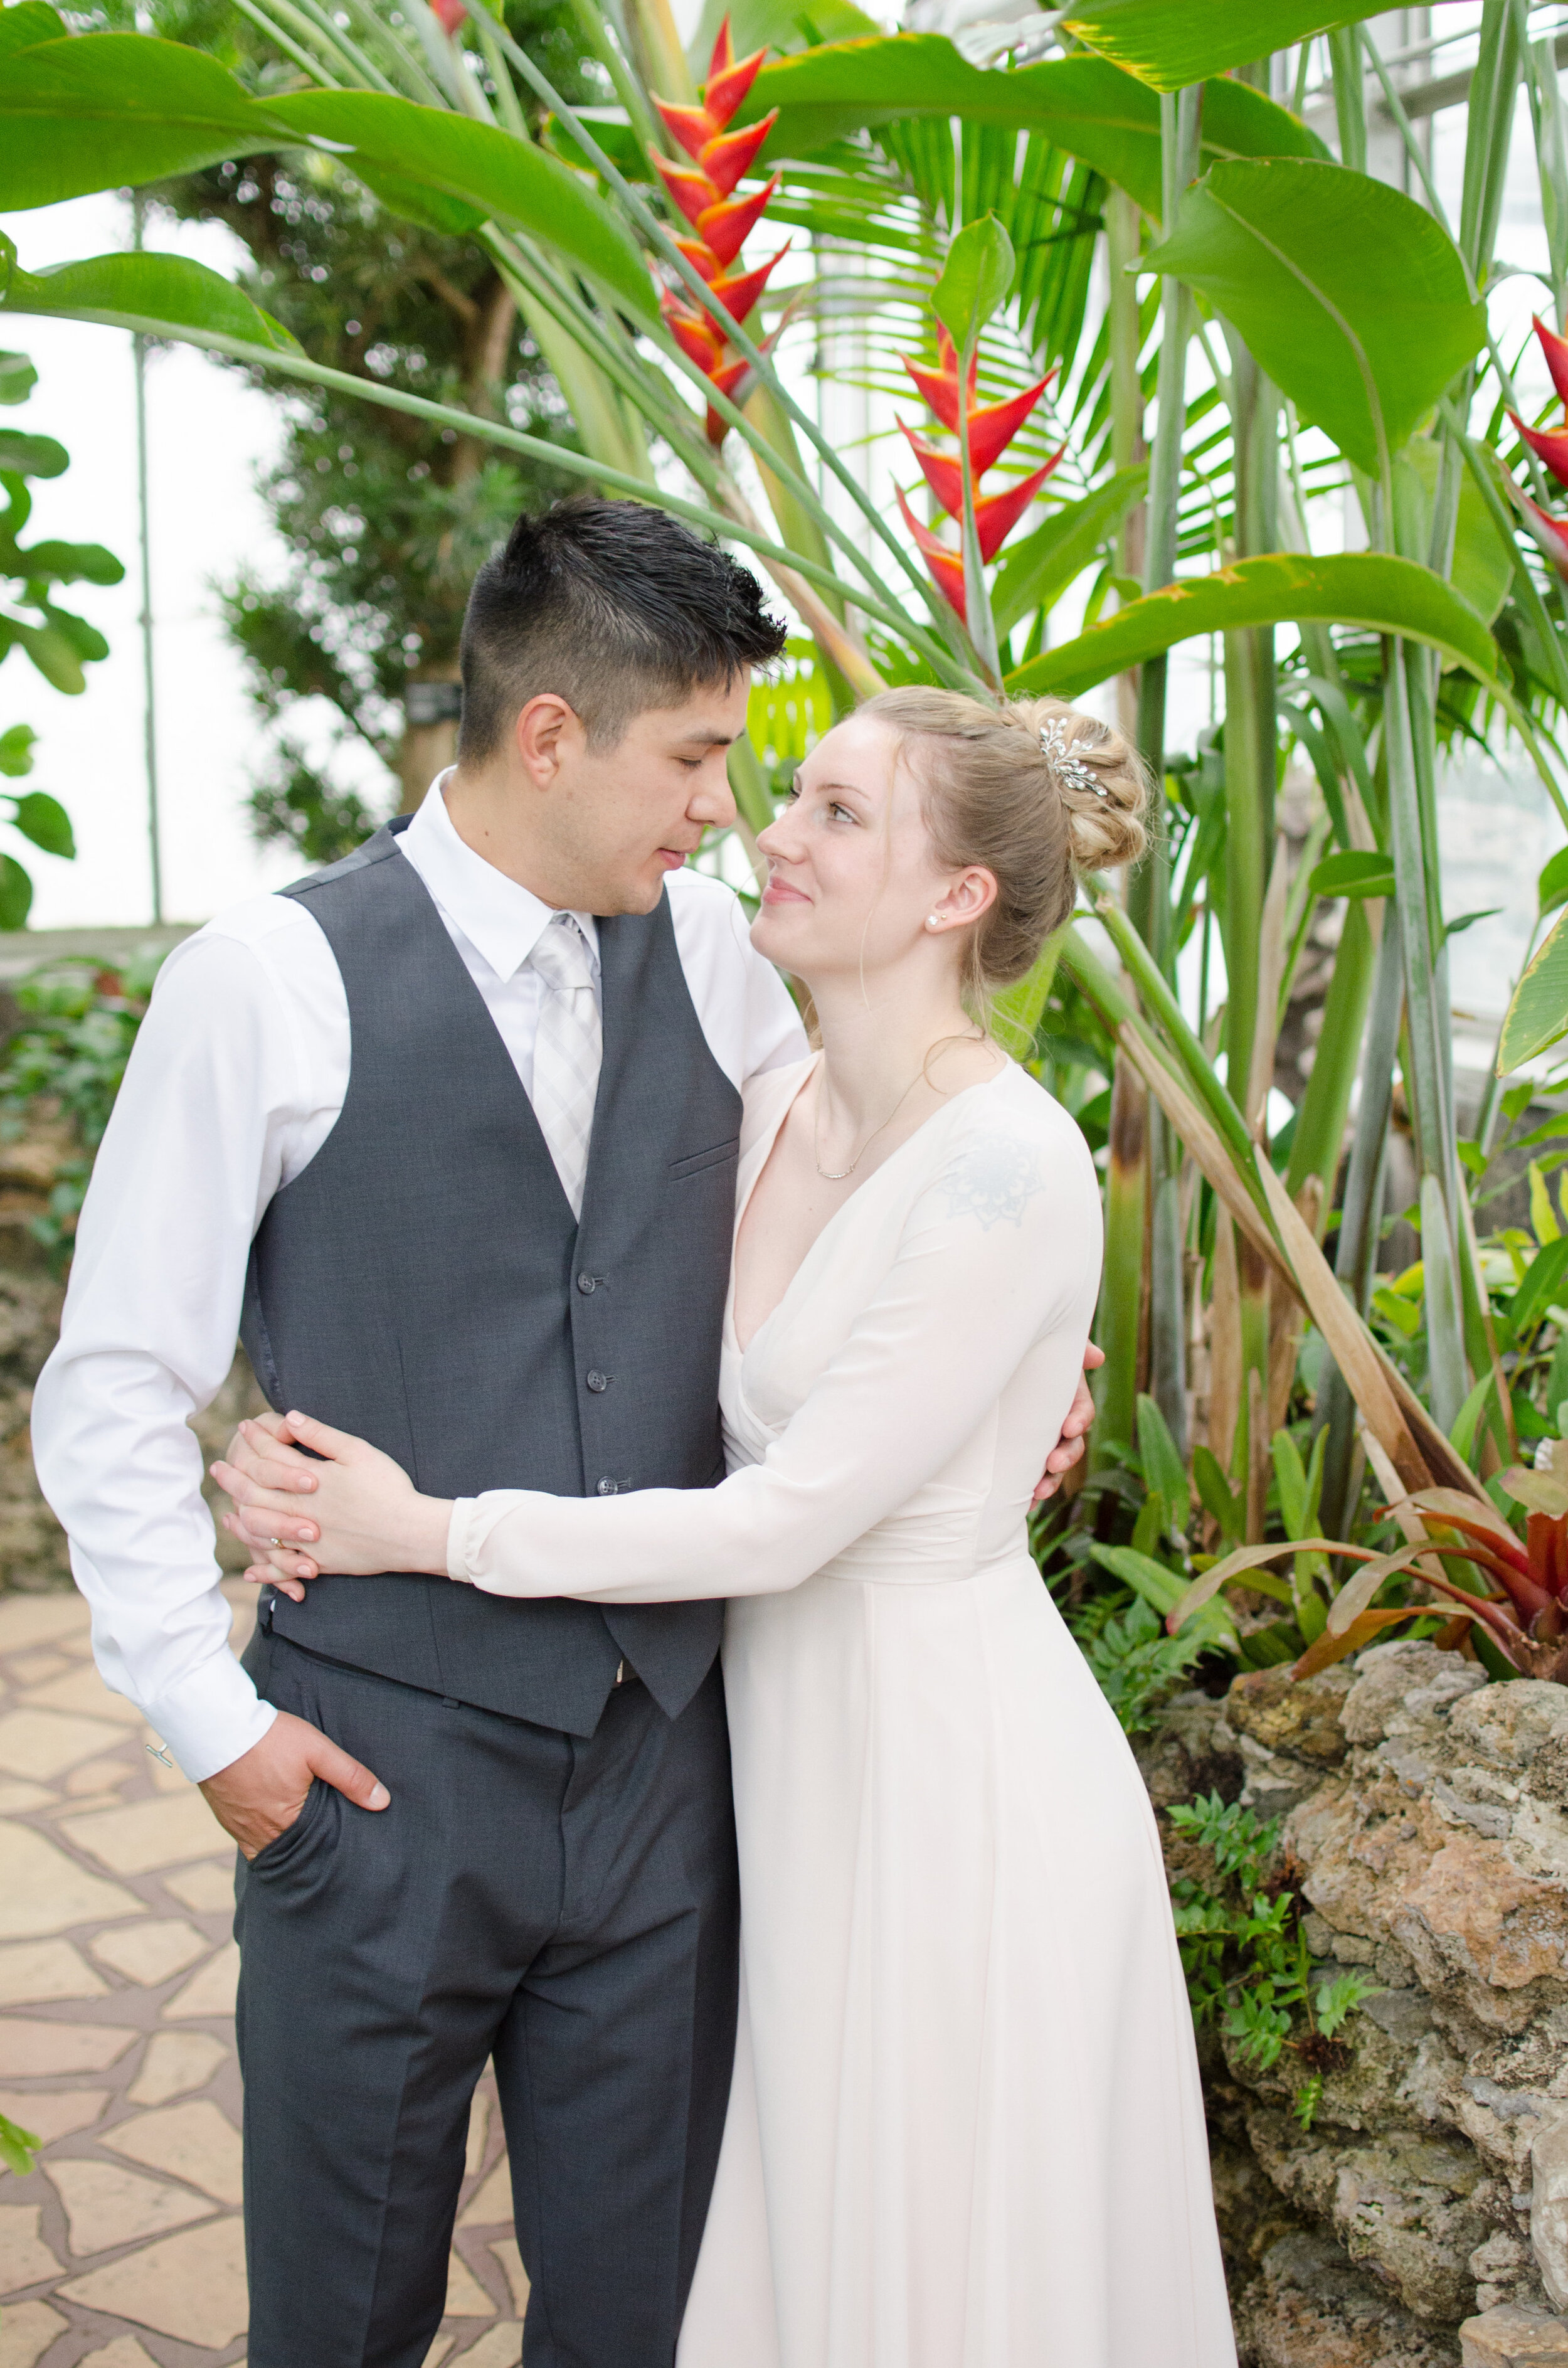 Intimate Oak Park Conservatory Greenhouse Wedding captured by K. Marie Studios. Head to CHItheeWED.com for more wedding ideas!